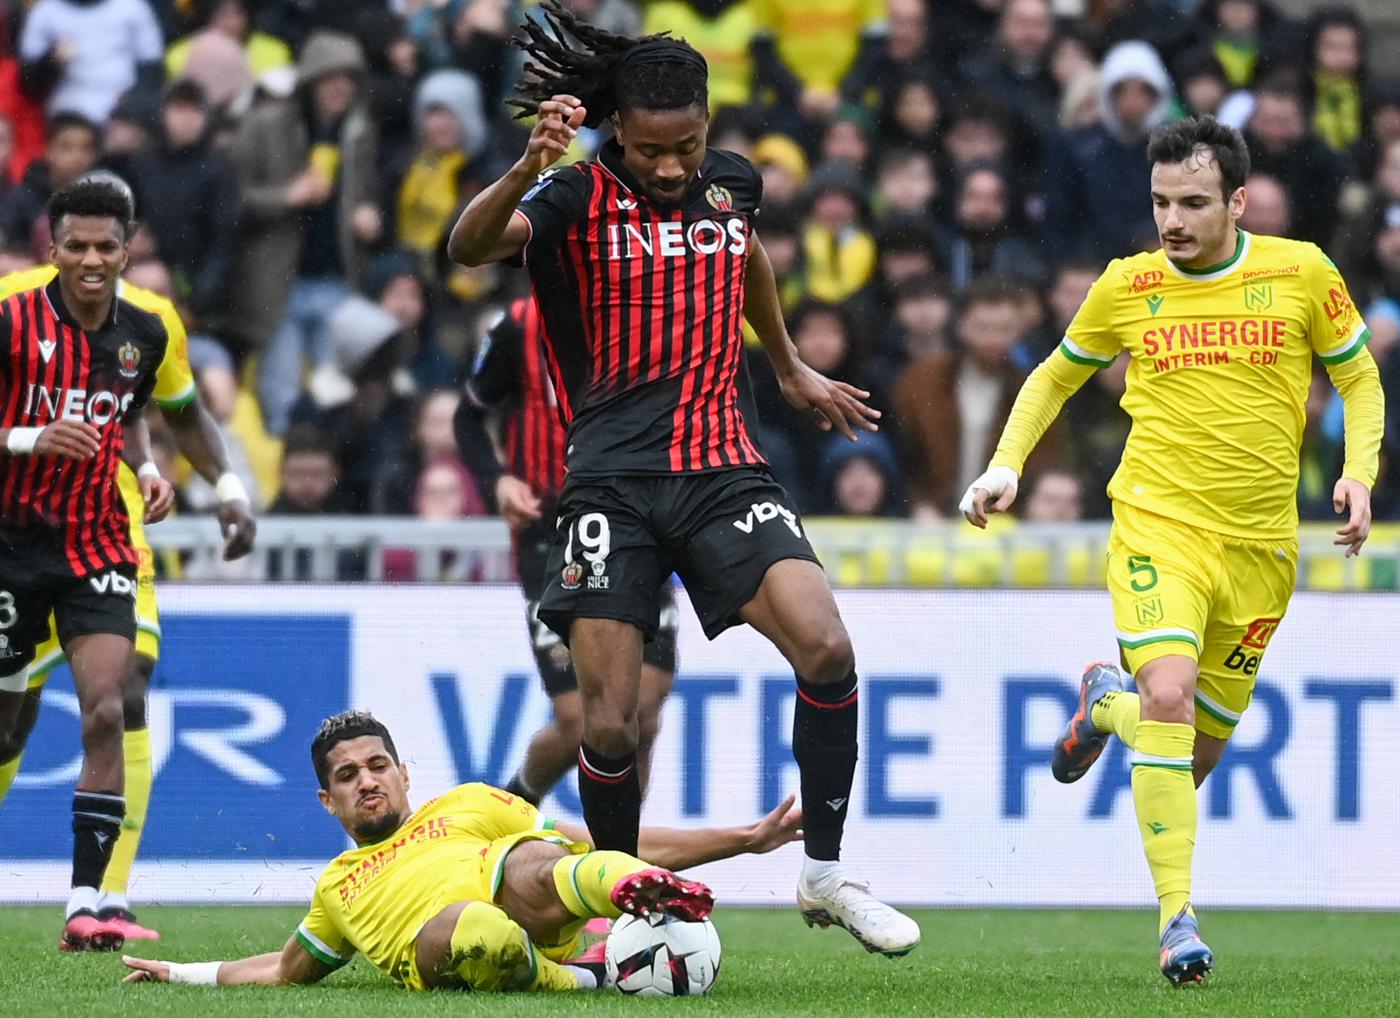 Nantes - Nice - 2:2. French Championship, 27th round. Match Review, Statistics